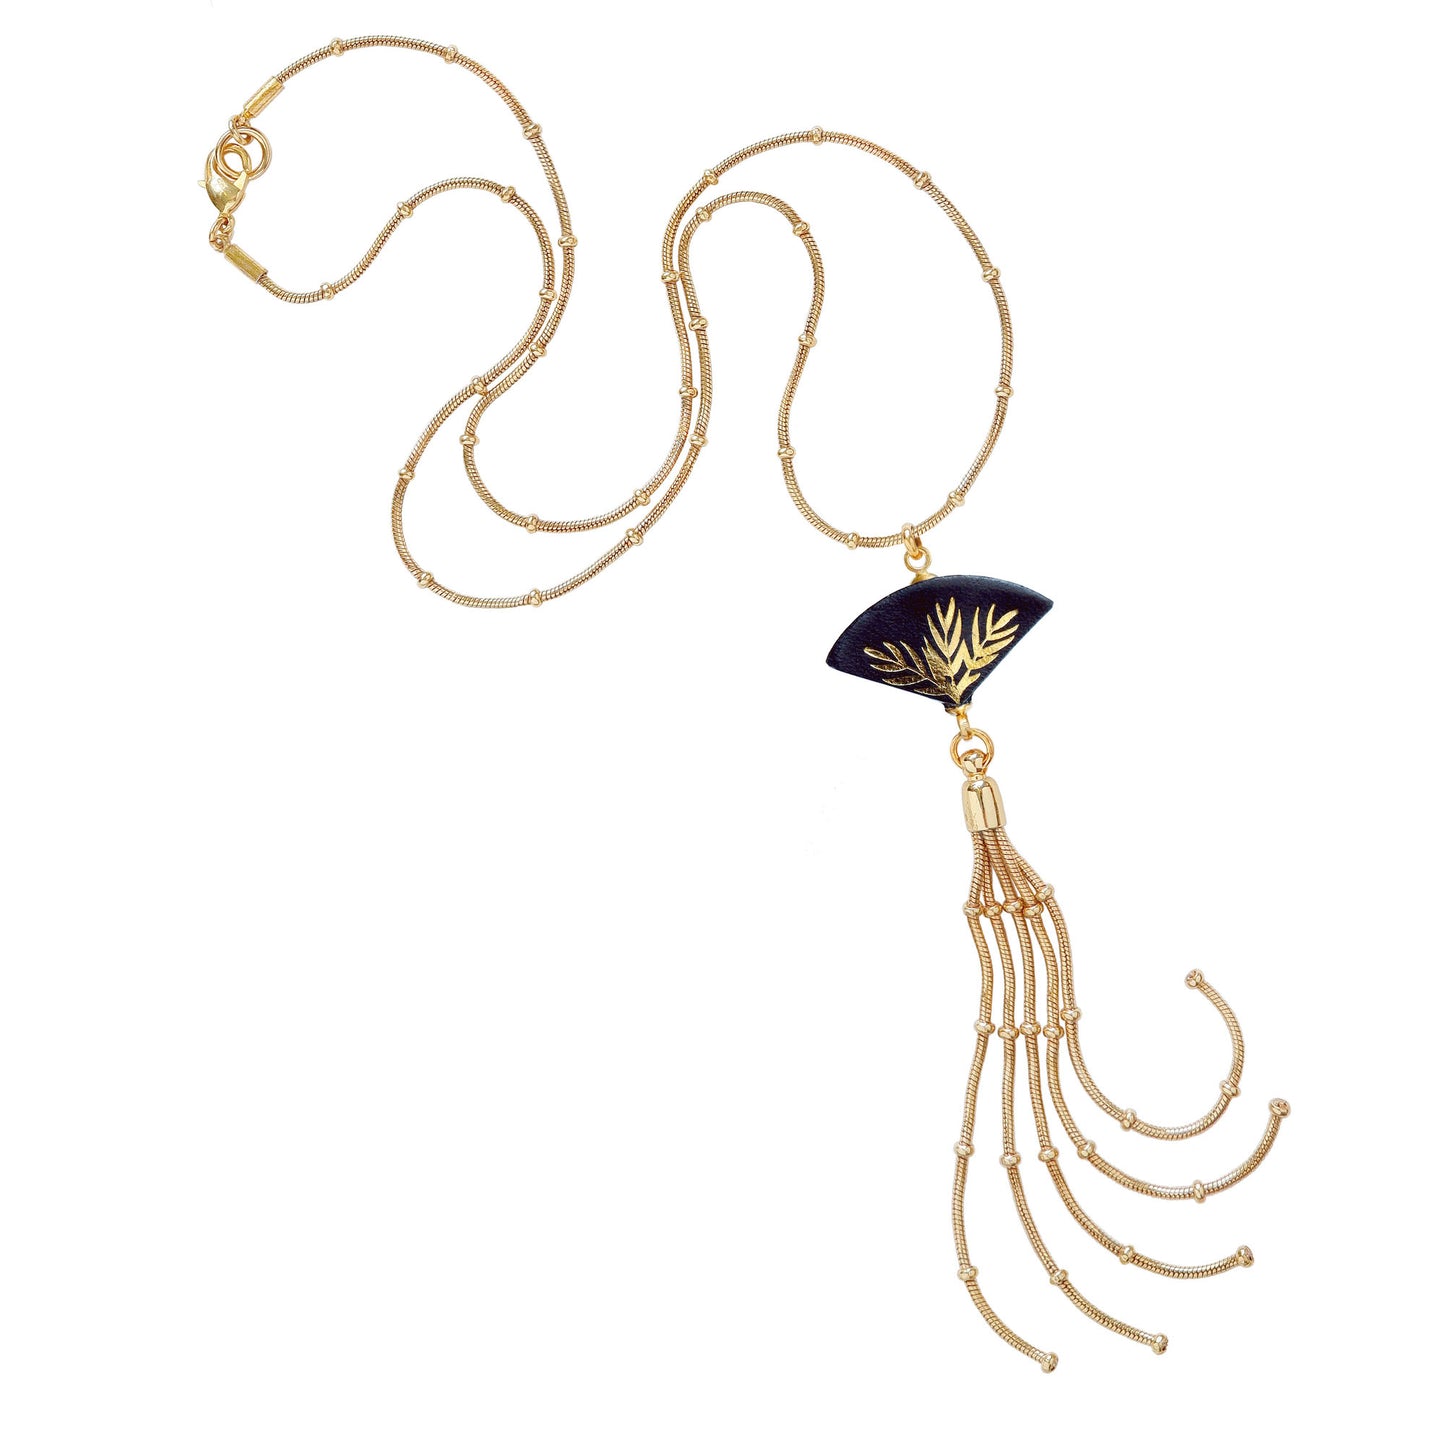 black leather fan pendant, with gold palm tree print, on gold beaded snake chain, with long chain tassel